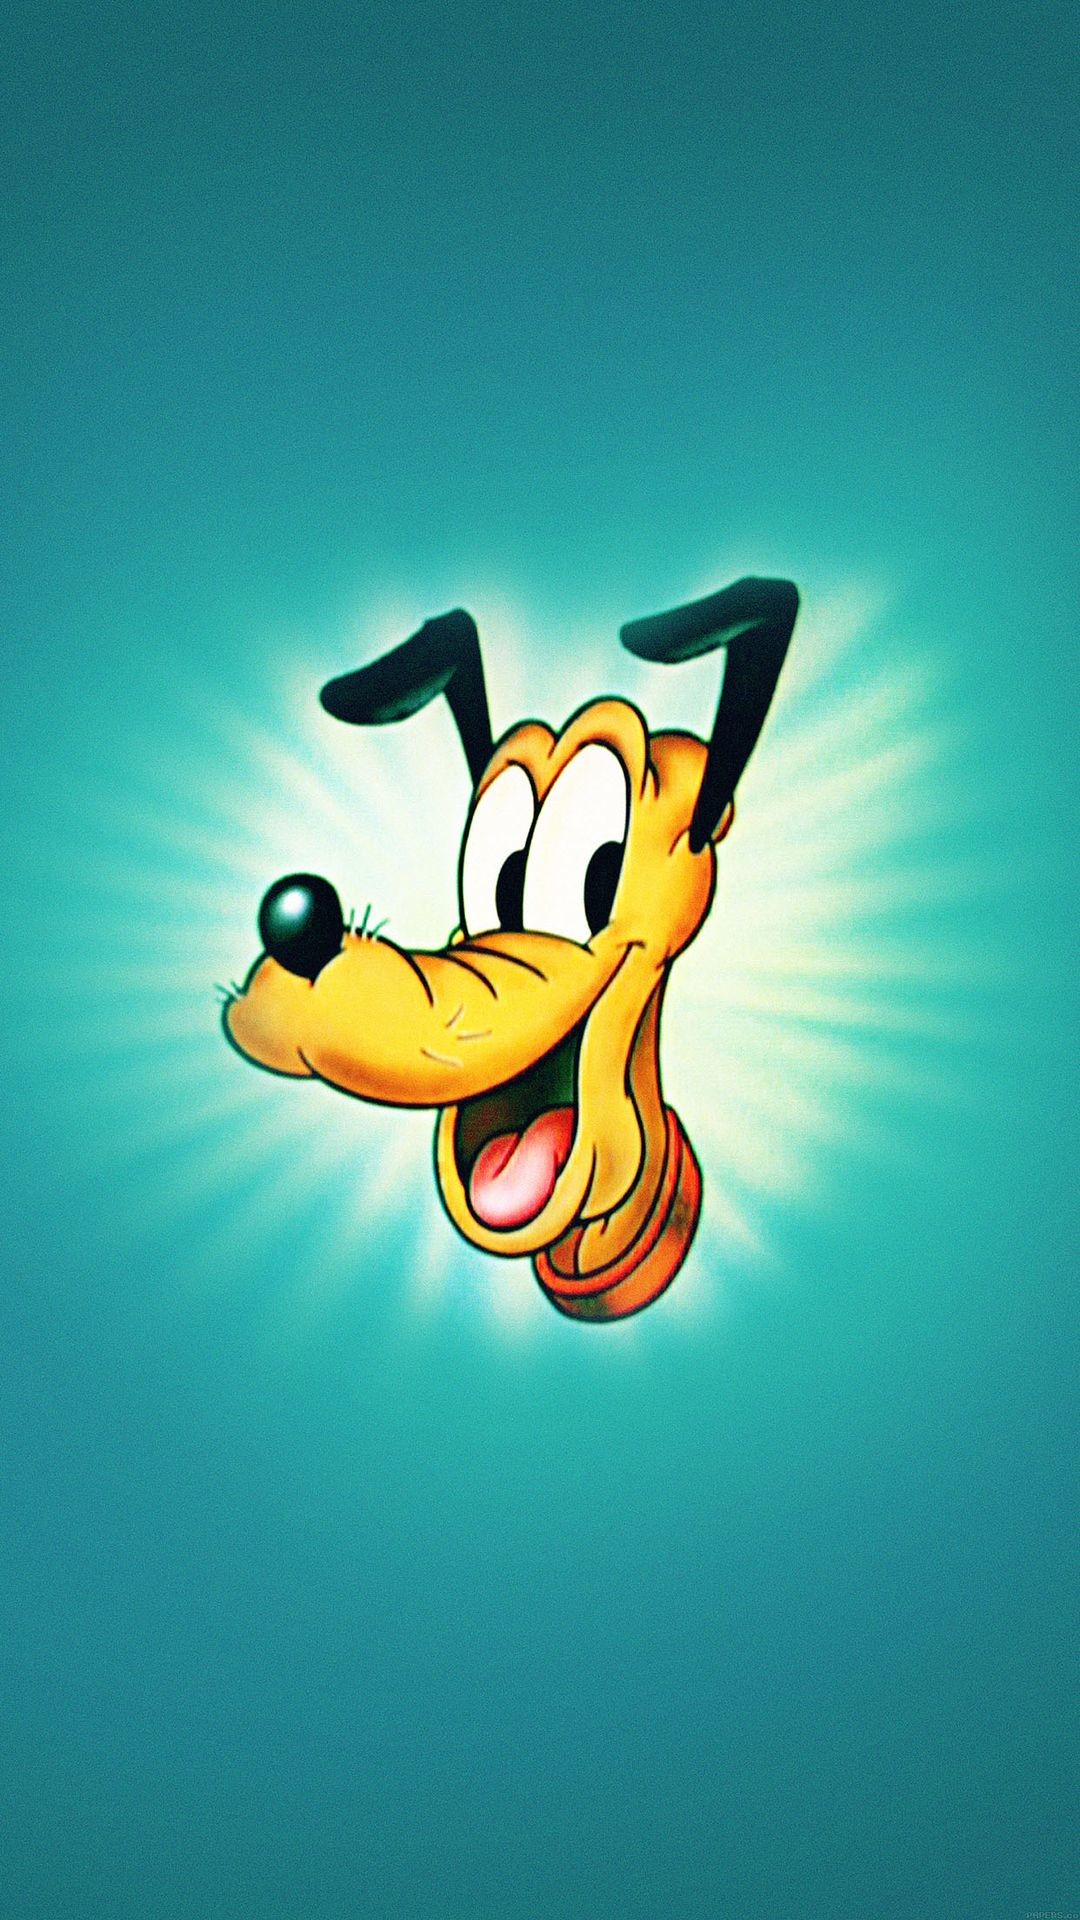 1080x1920 Download Disney pluto iPhone Wallpapers. Tap to see more iPhone backgrounds  - @mobile9 -